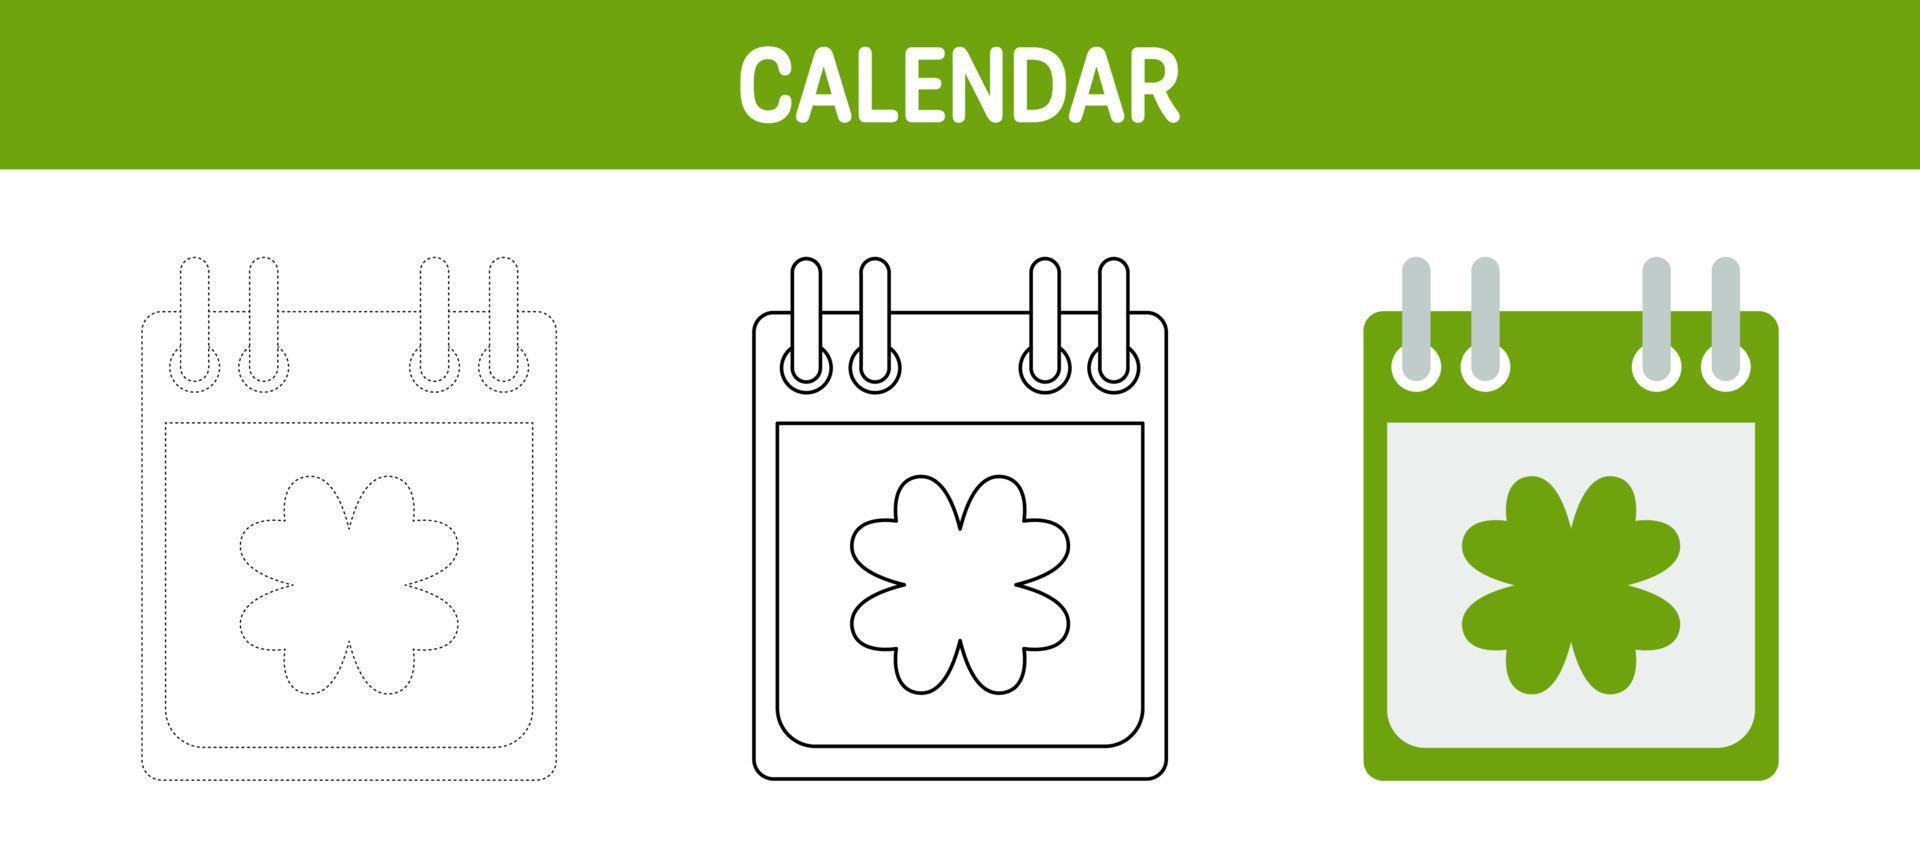 Calendar with Clover tracing and coloring worksheet for kids vector